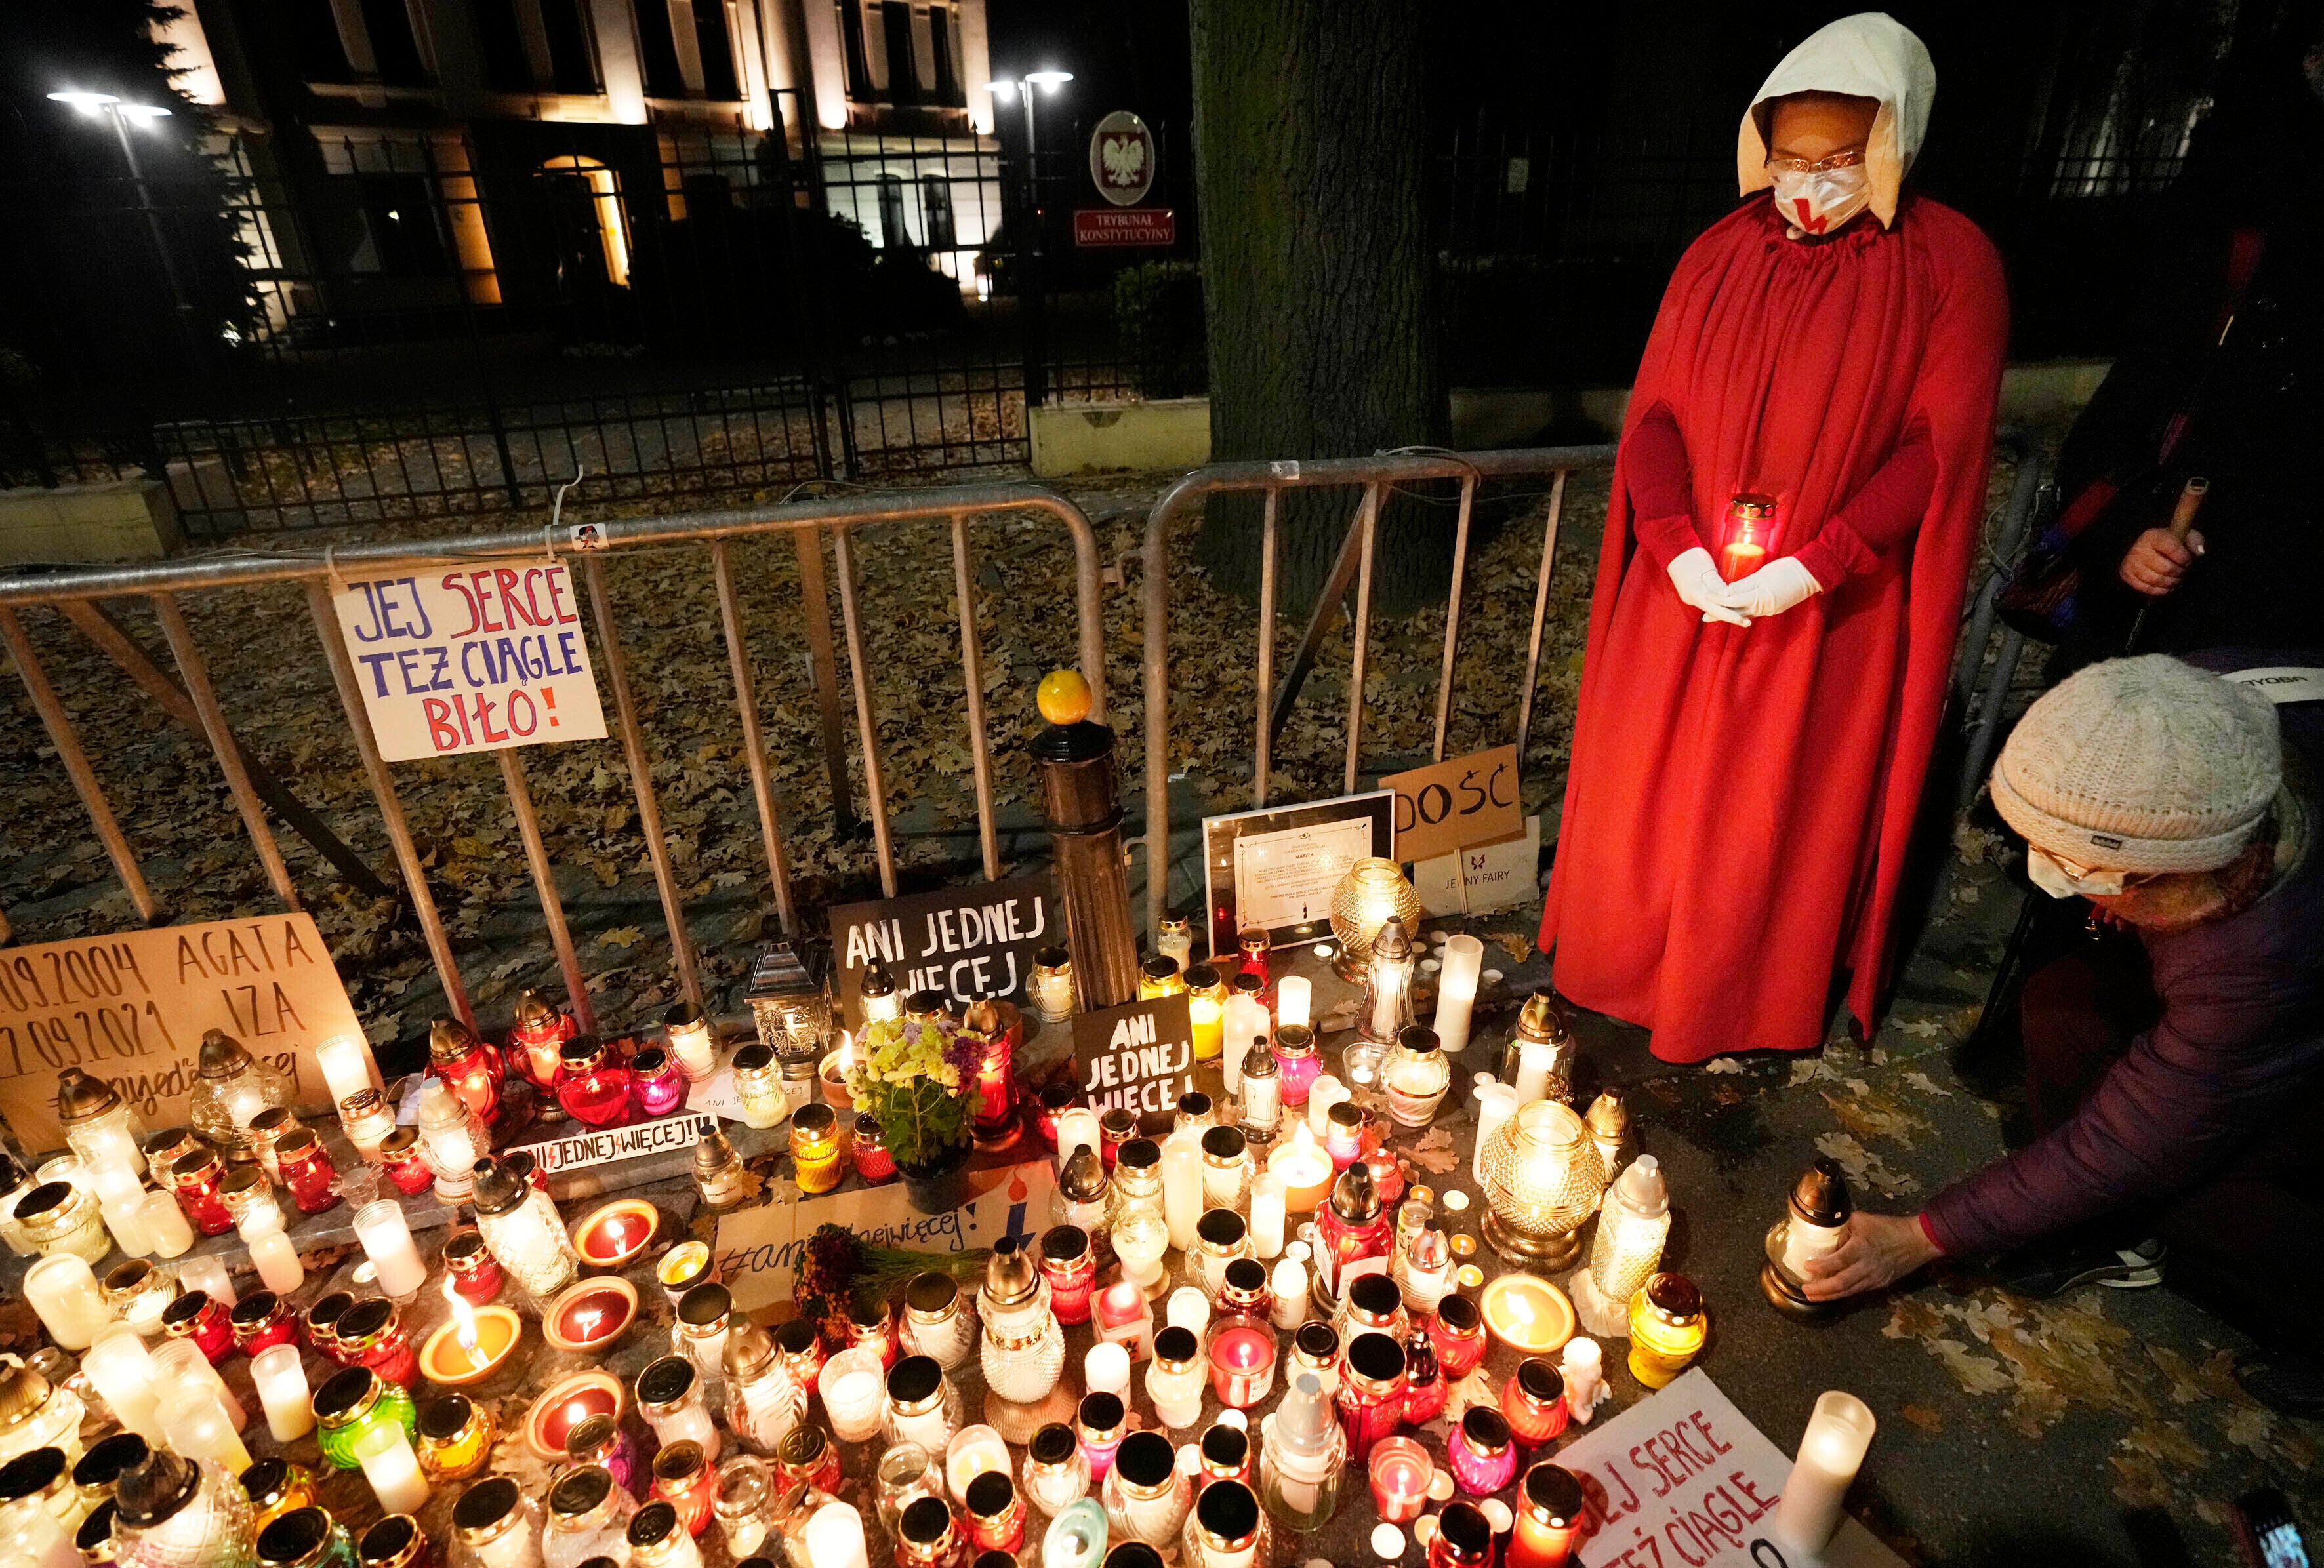 People place candles in tribute to a woman who died in the 22nd week of pregnancy, in Warsaw, Poland, last November